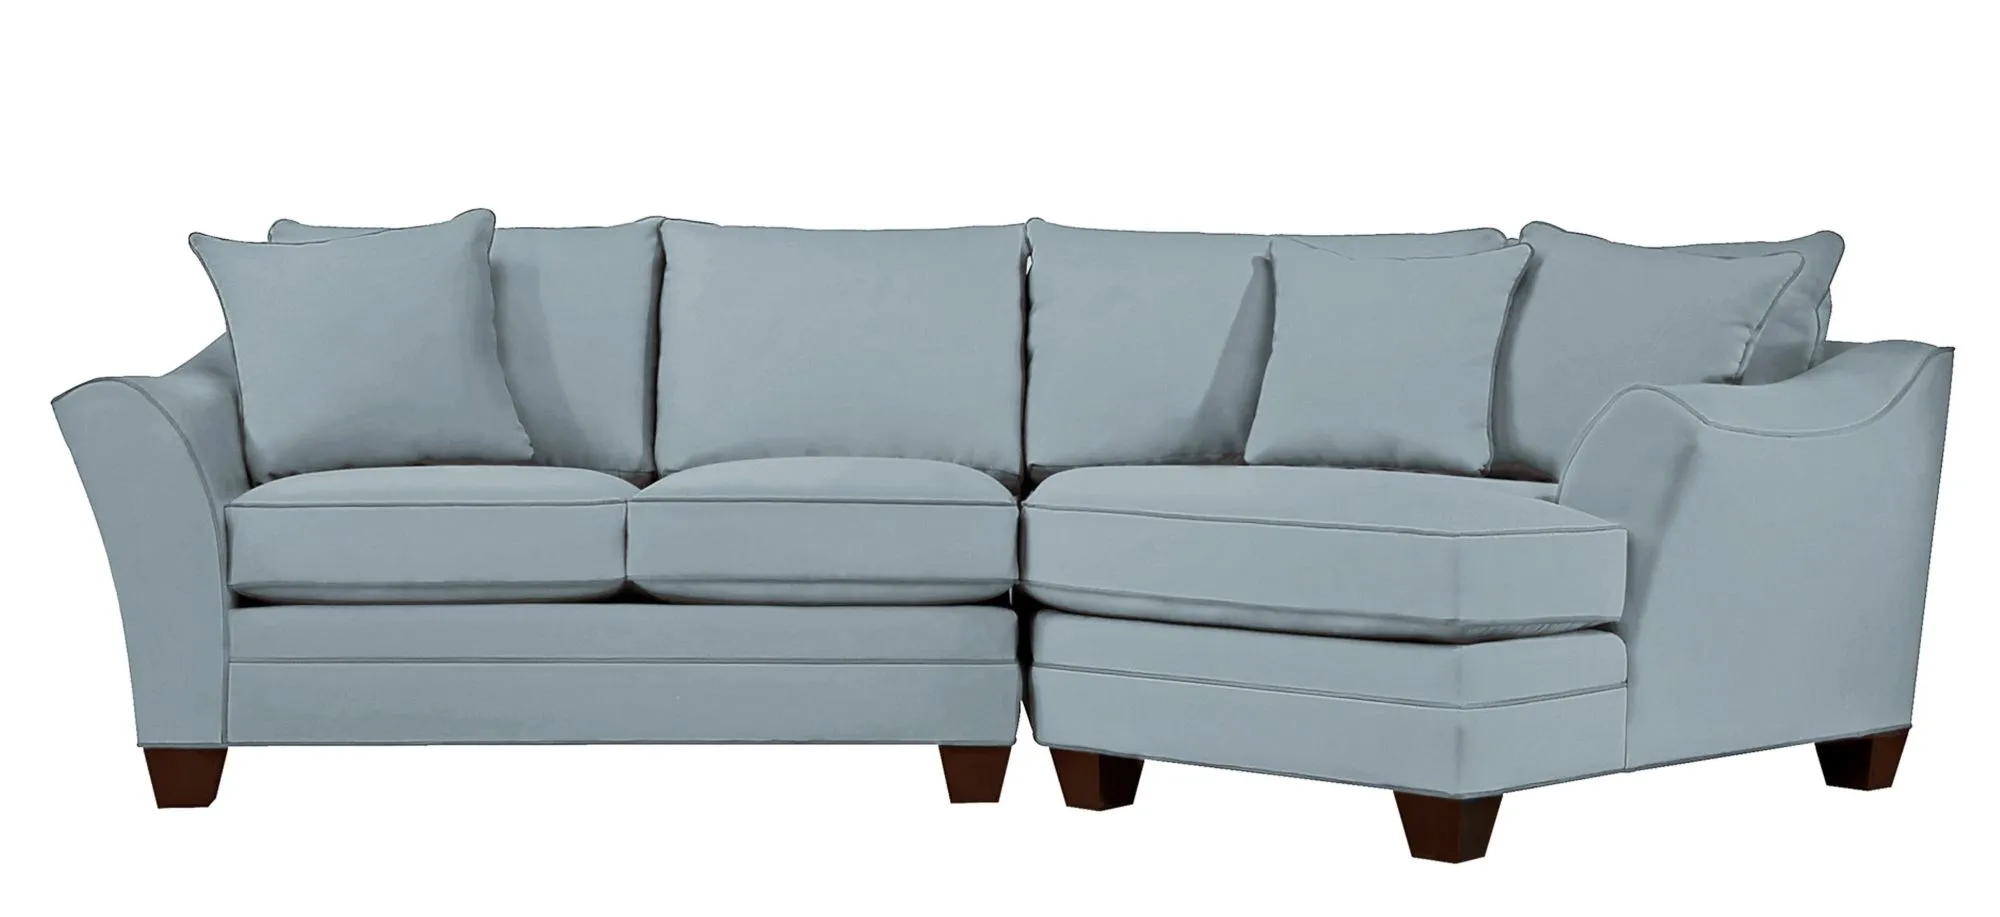 Foresthill 2-pc. Right Hand Cuddler Sectional Sofa in Suede So Soft Hydra by H.M. Richards